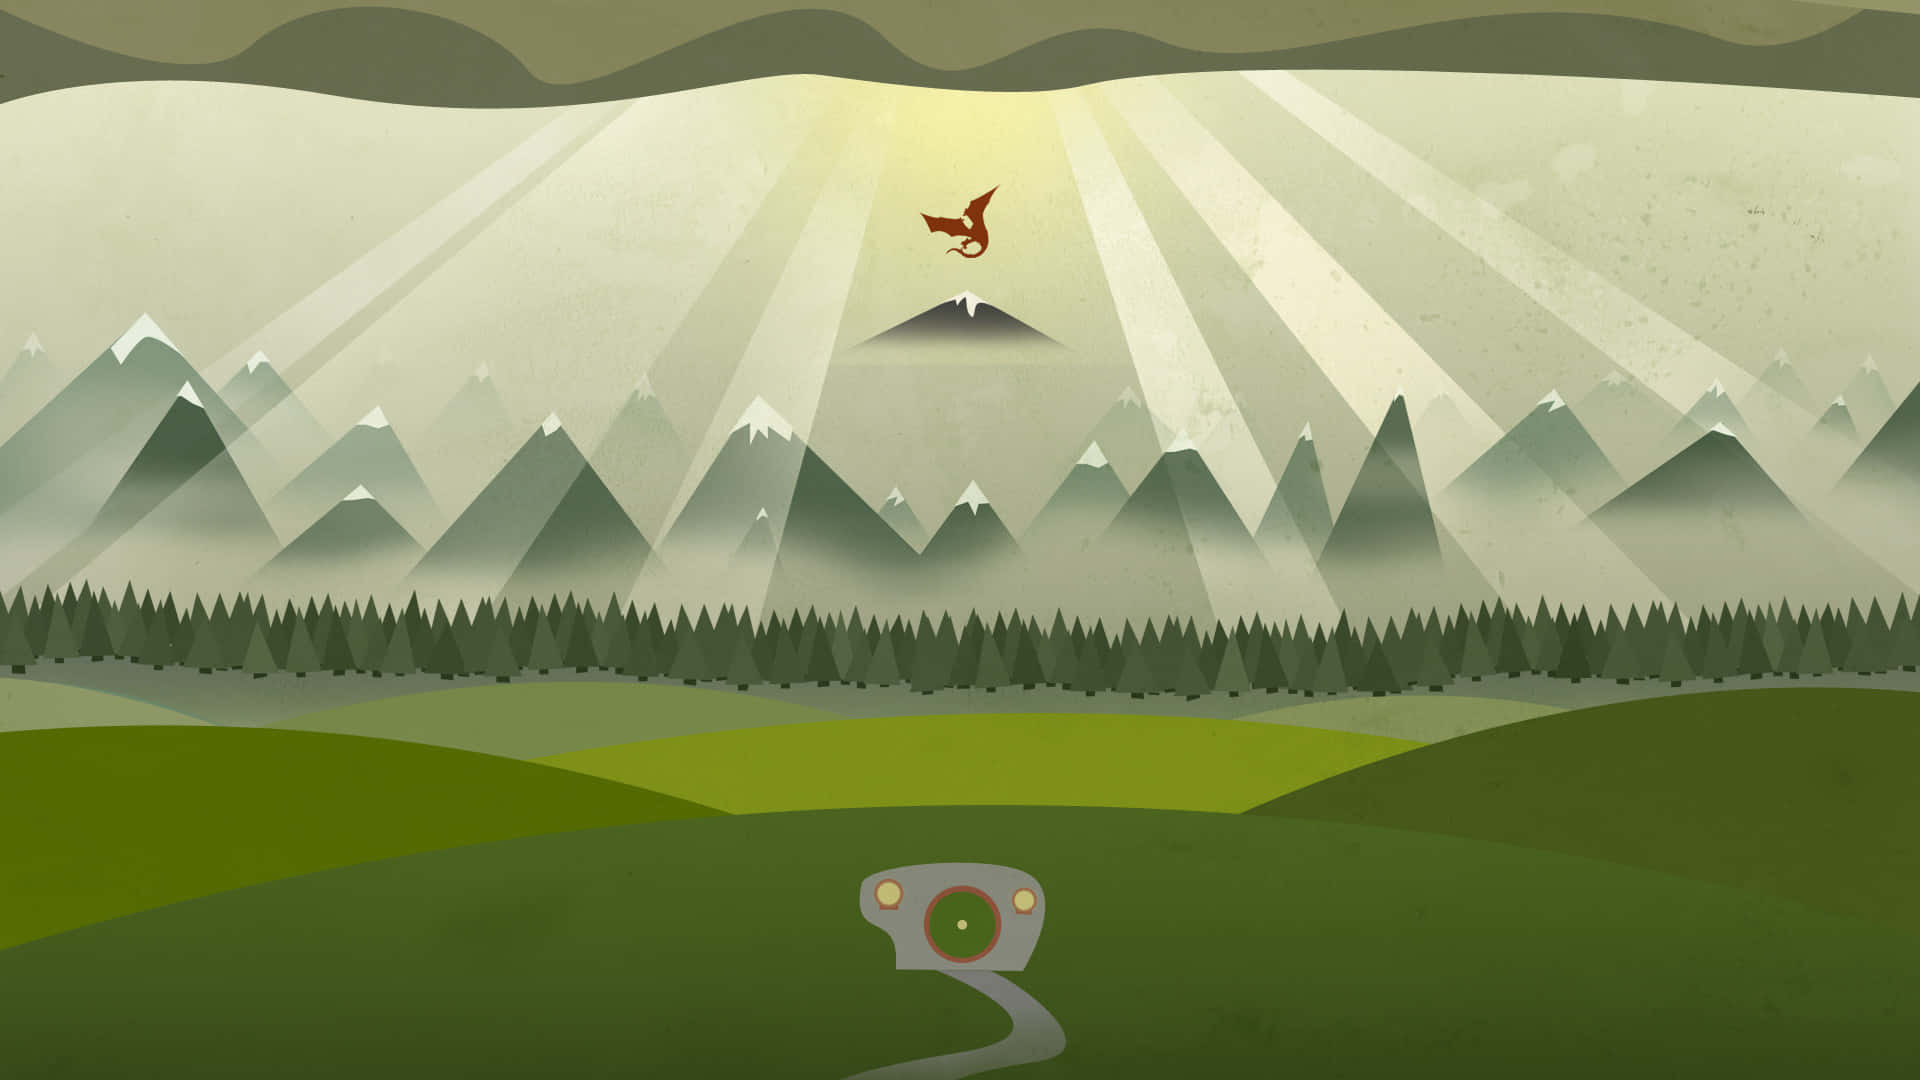 Misty Mountains And Dragon Illustration Background